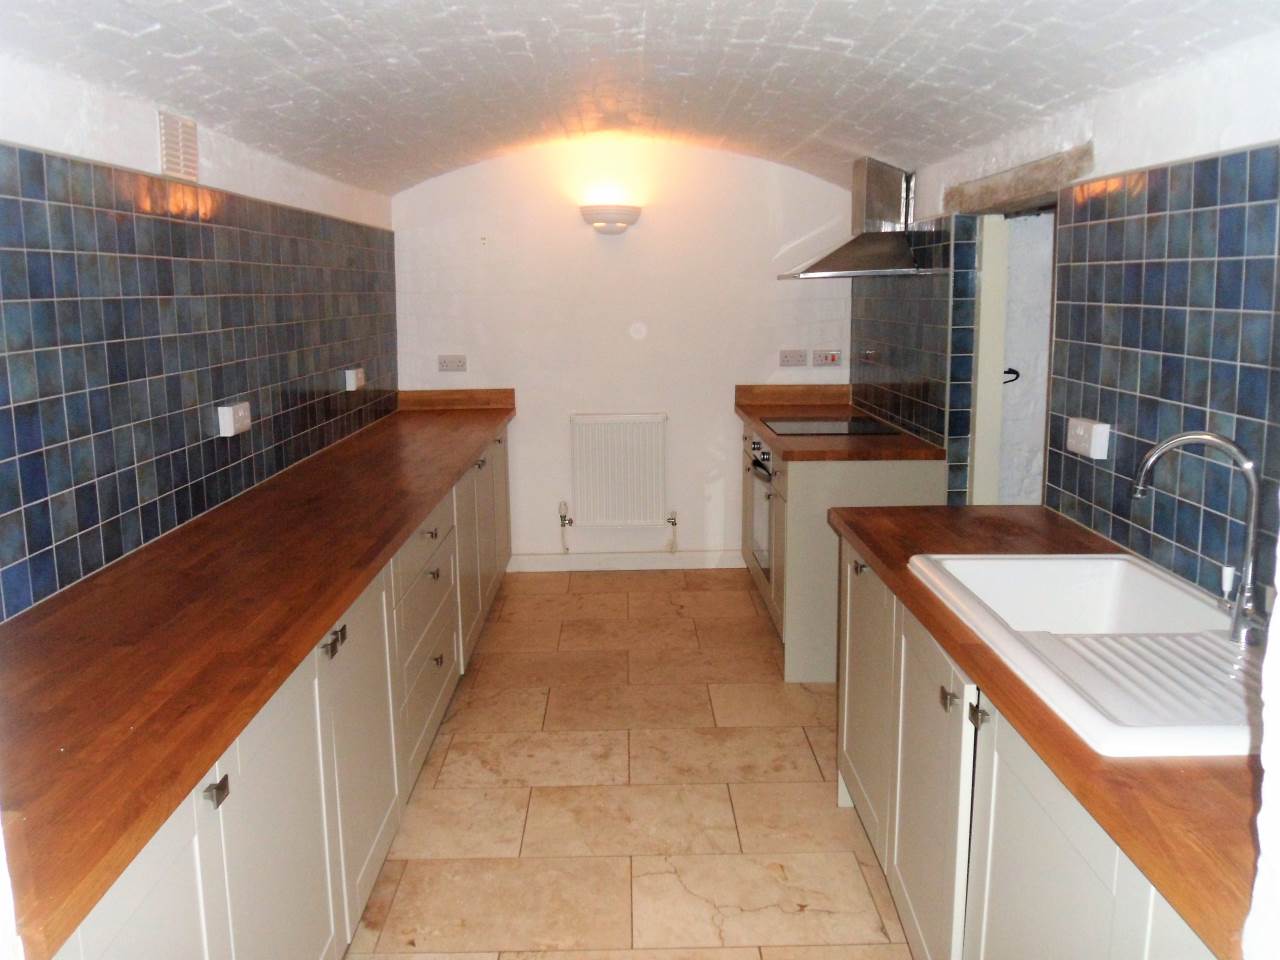 2 bed Flat for rent in Falfield. From Property Wise